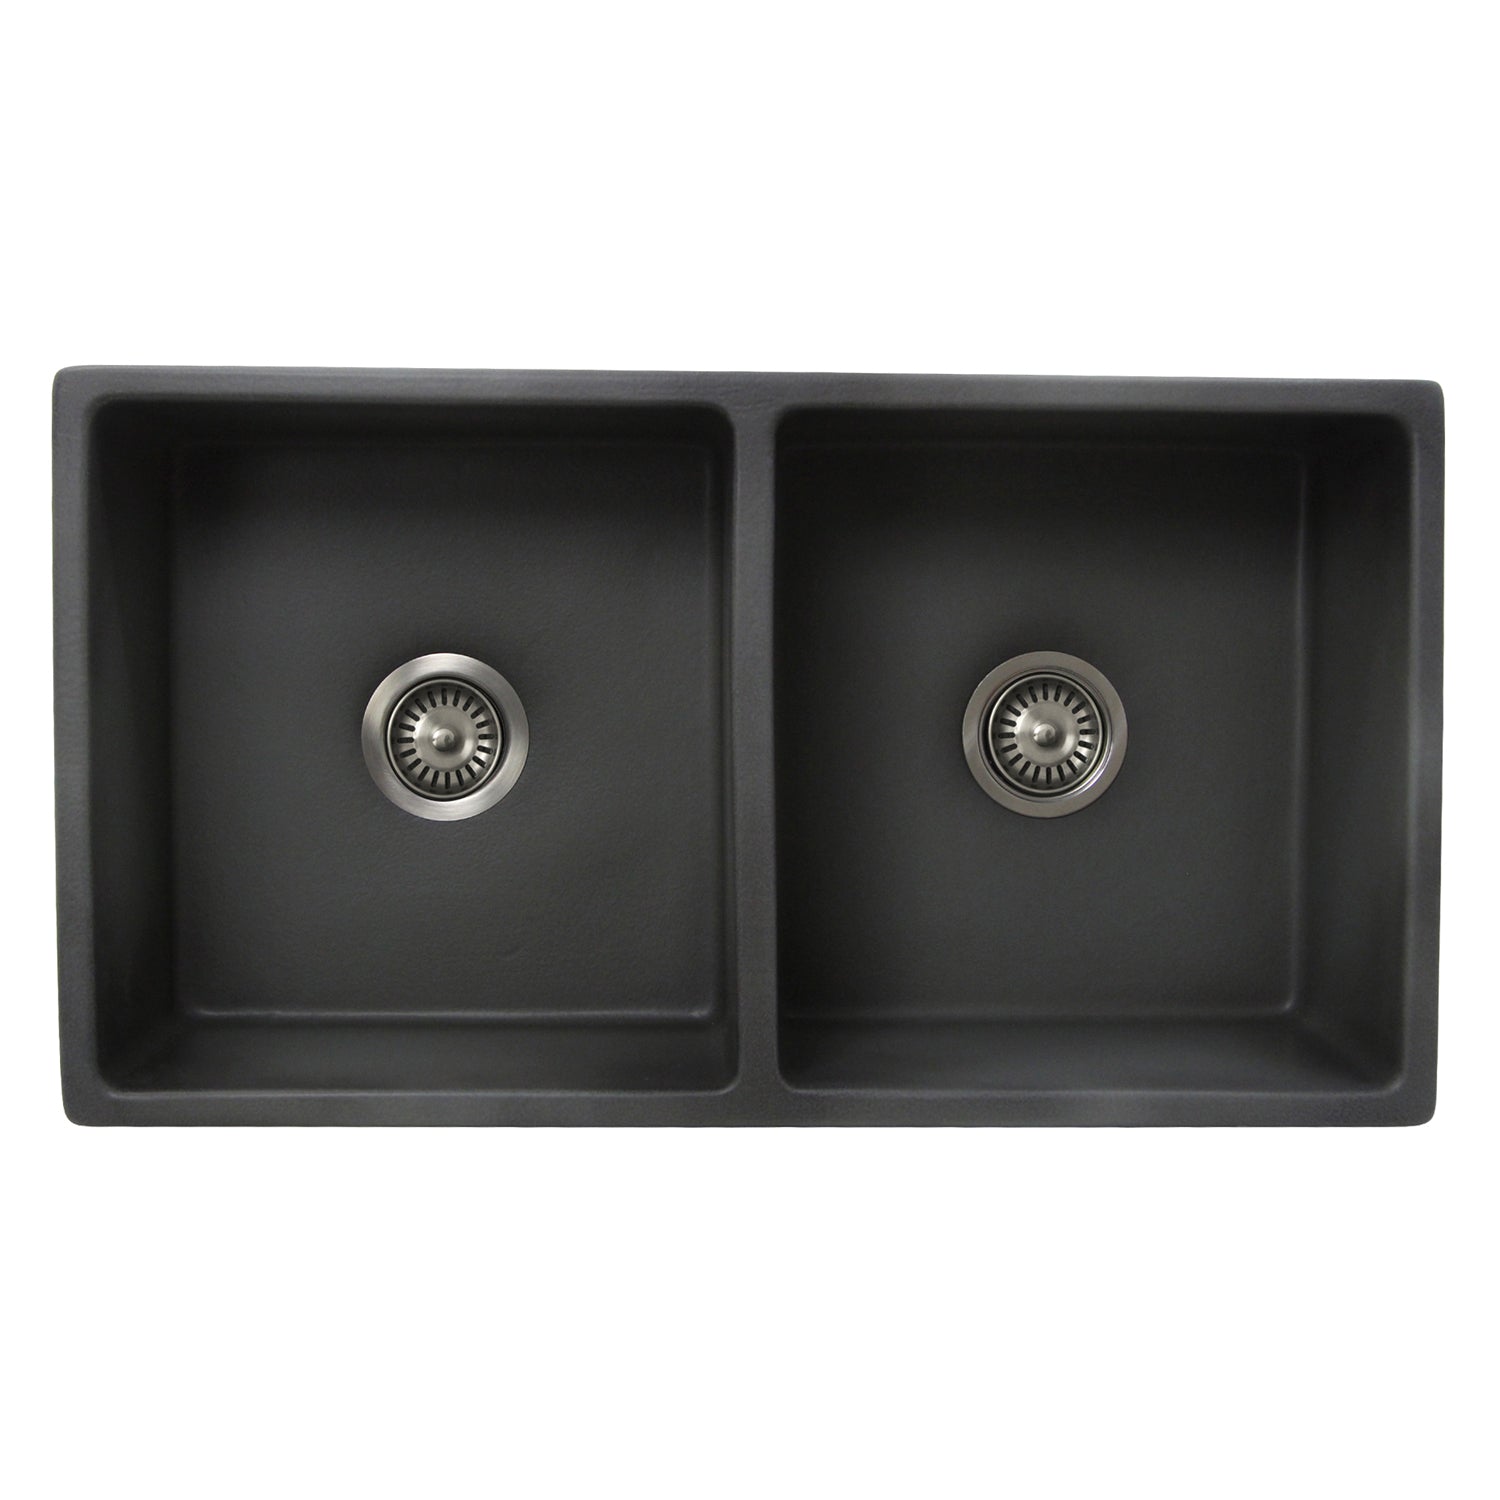 Nantucket Sinks Double Bowl Farmhouse Fireclay Sink with Concrete Finish